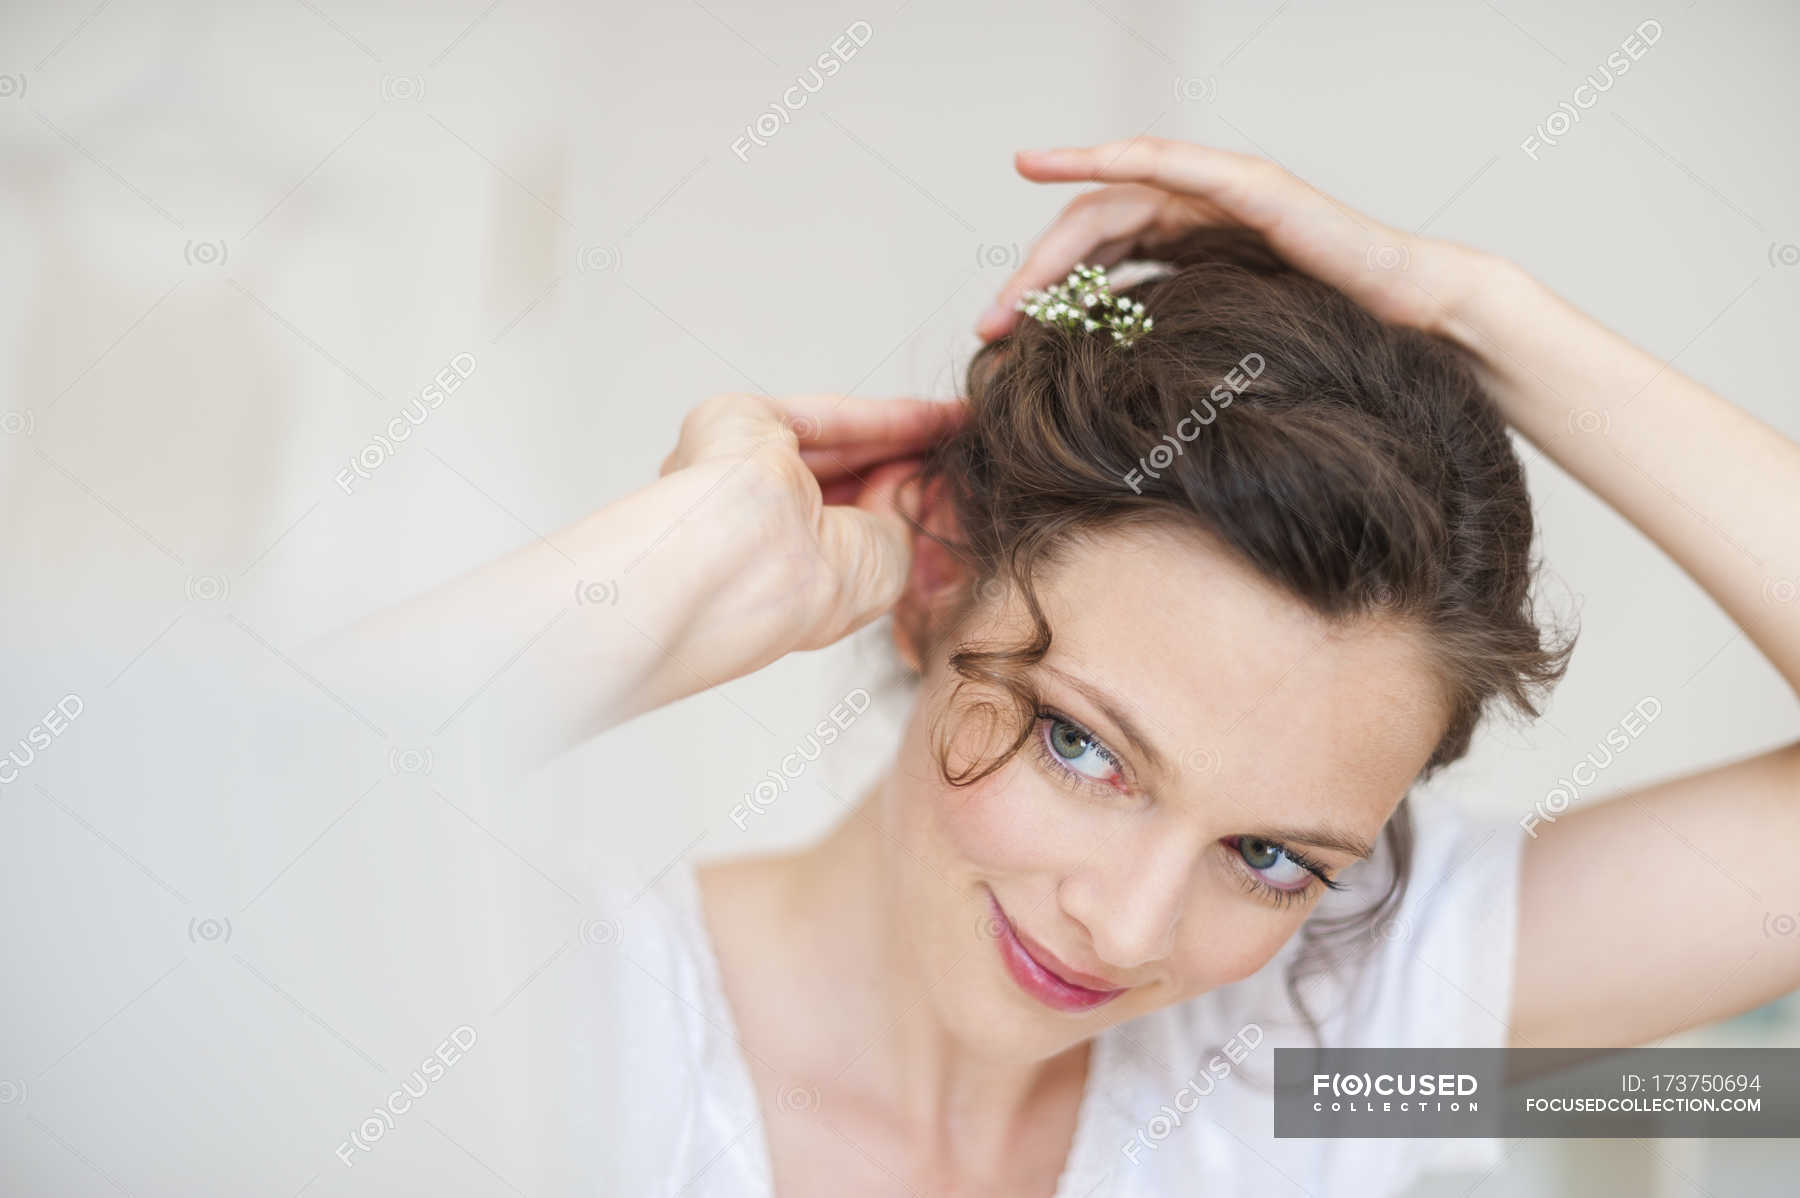 Close-up of Woman putting flowers in hair — beauty, attractive - Stock  Photo | #173750694